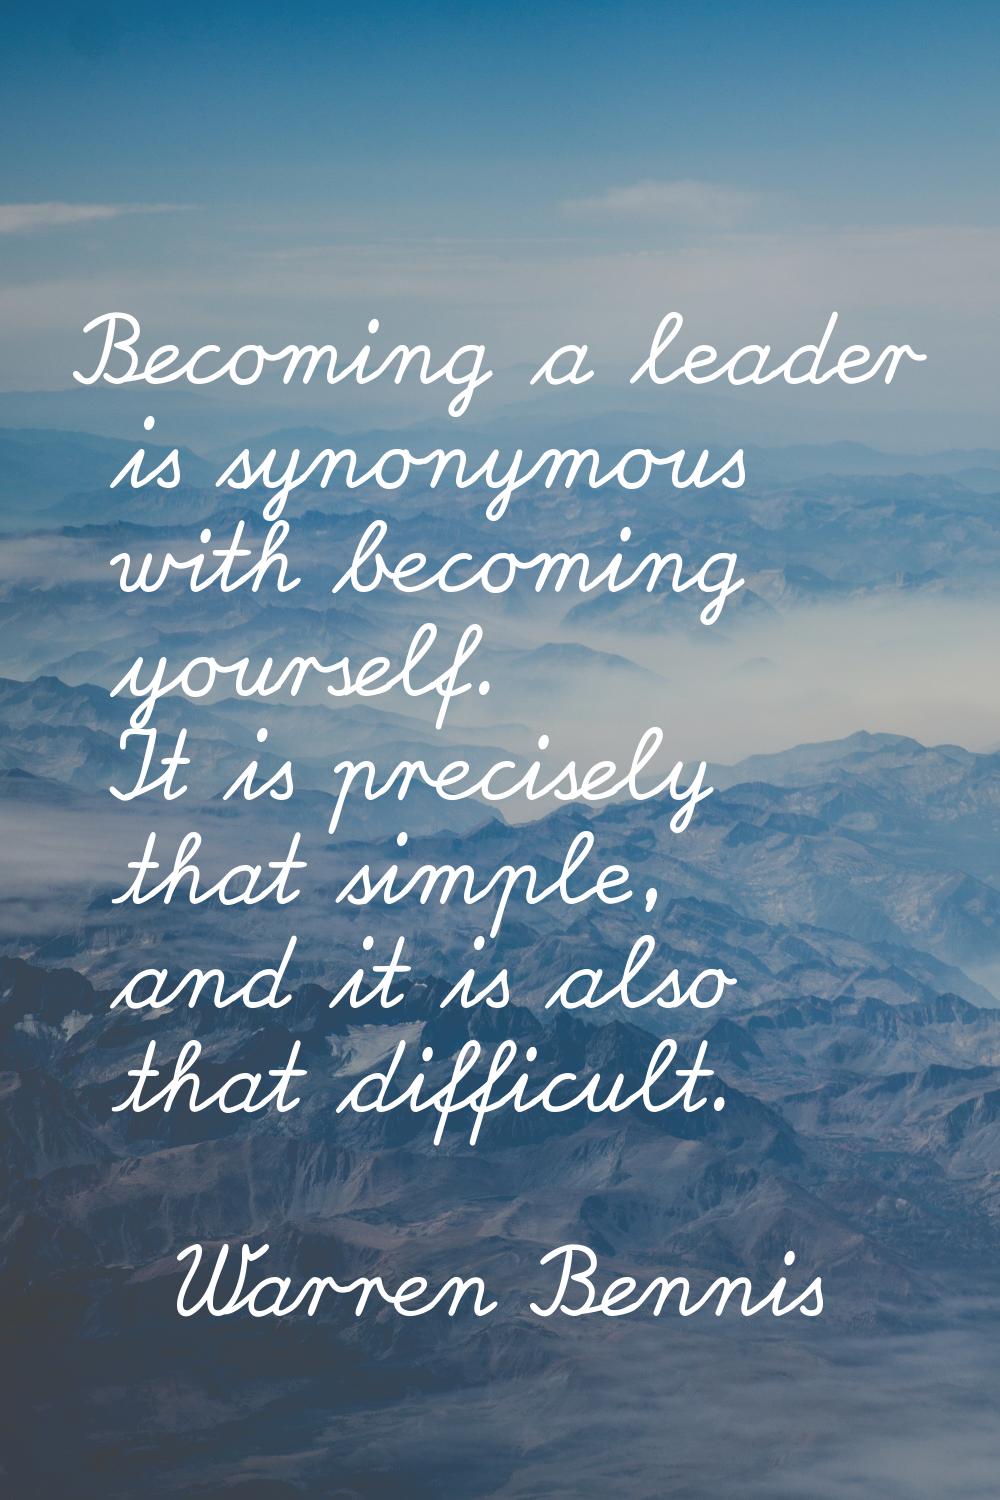 Becoming a leader is synonymous with becoming yourself. It is precisely that simple, and it is also